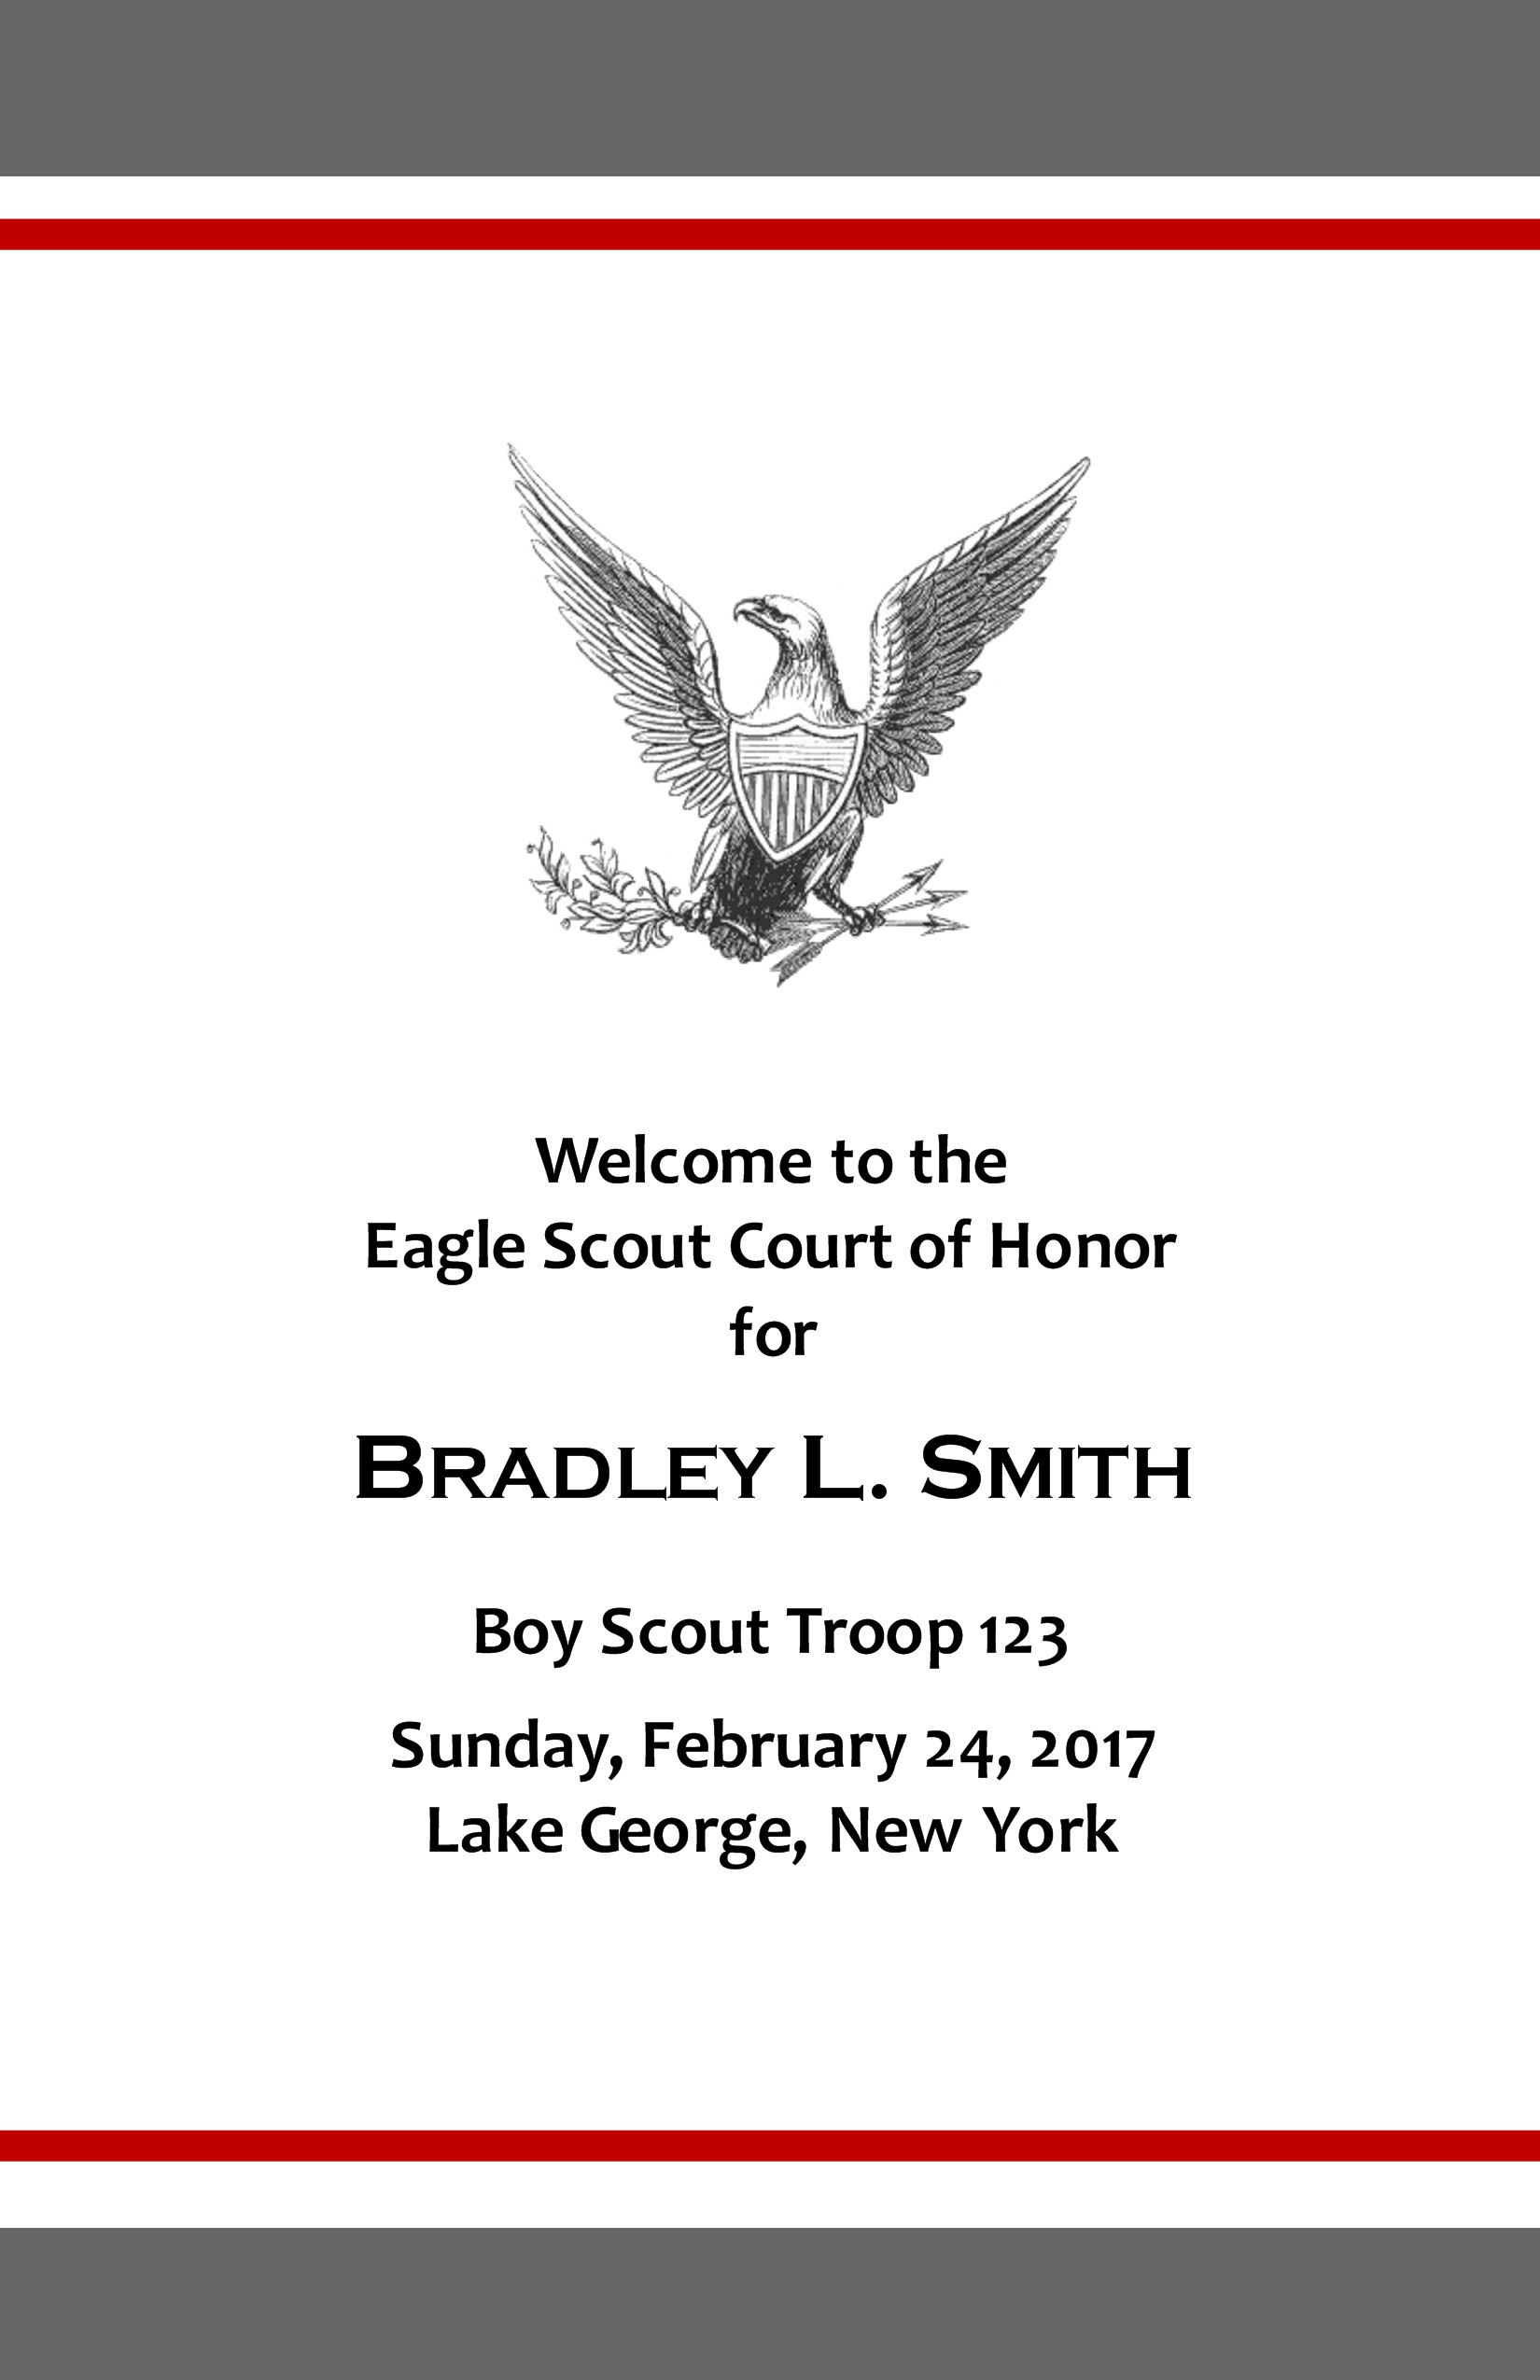 eagle-scout-court-of-honor-program-template